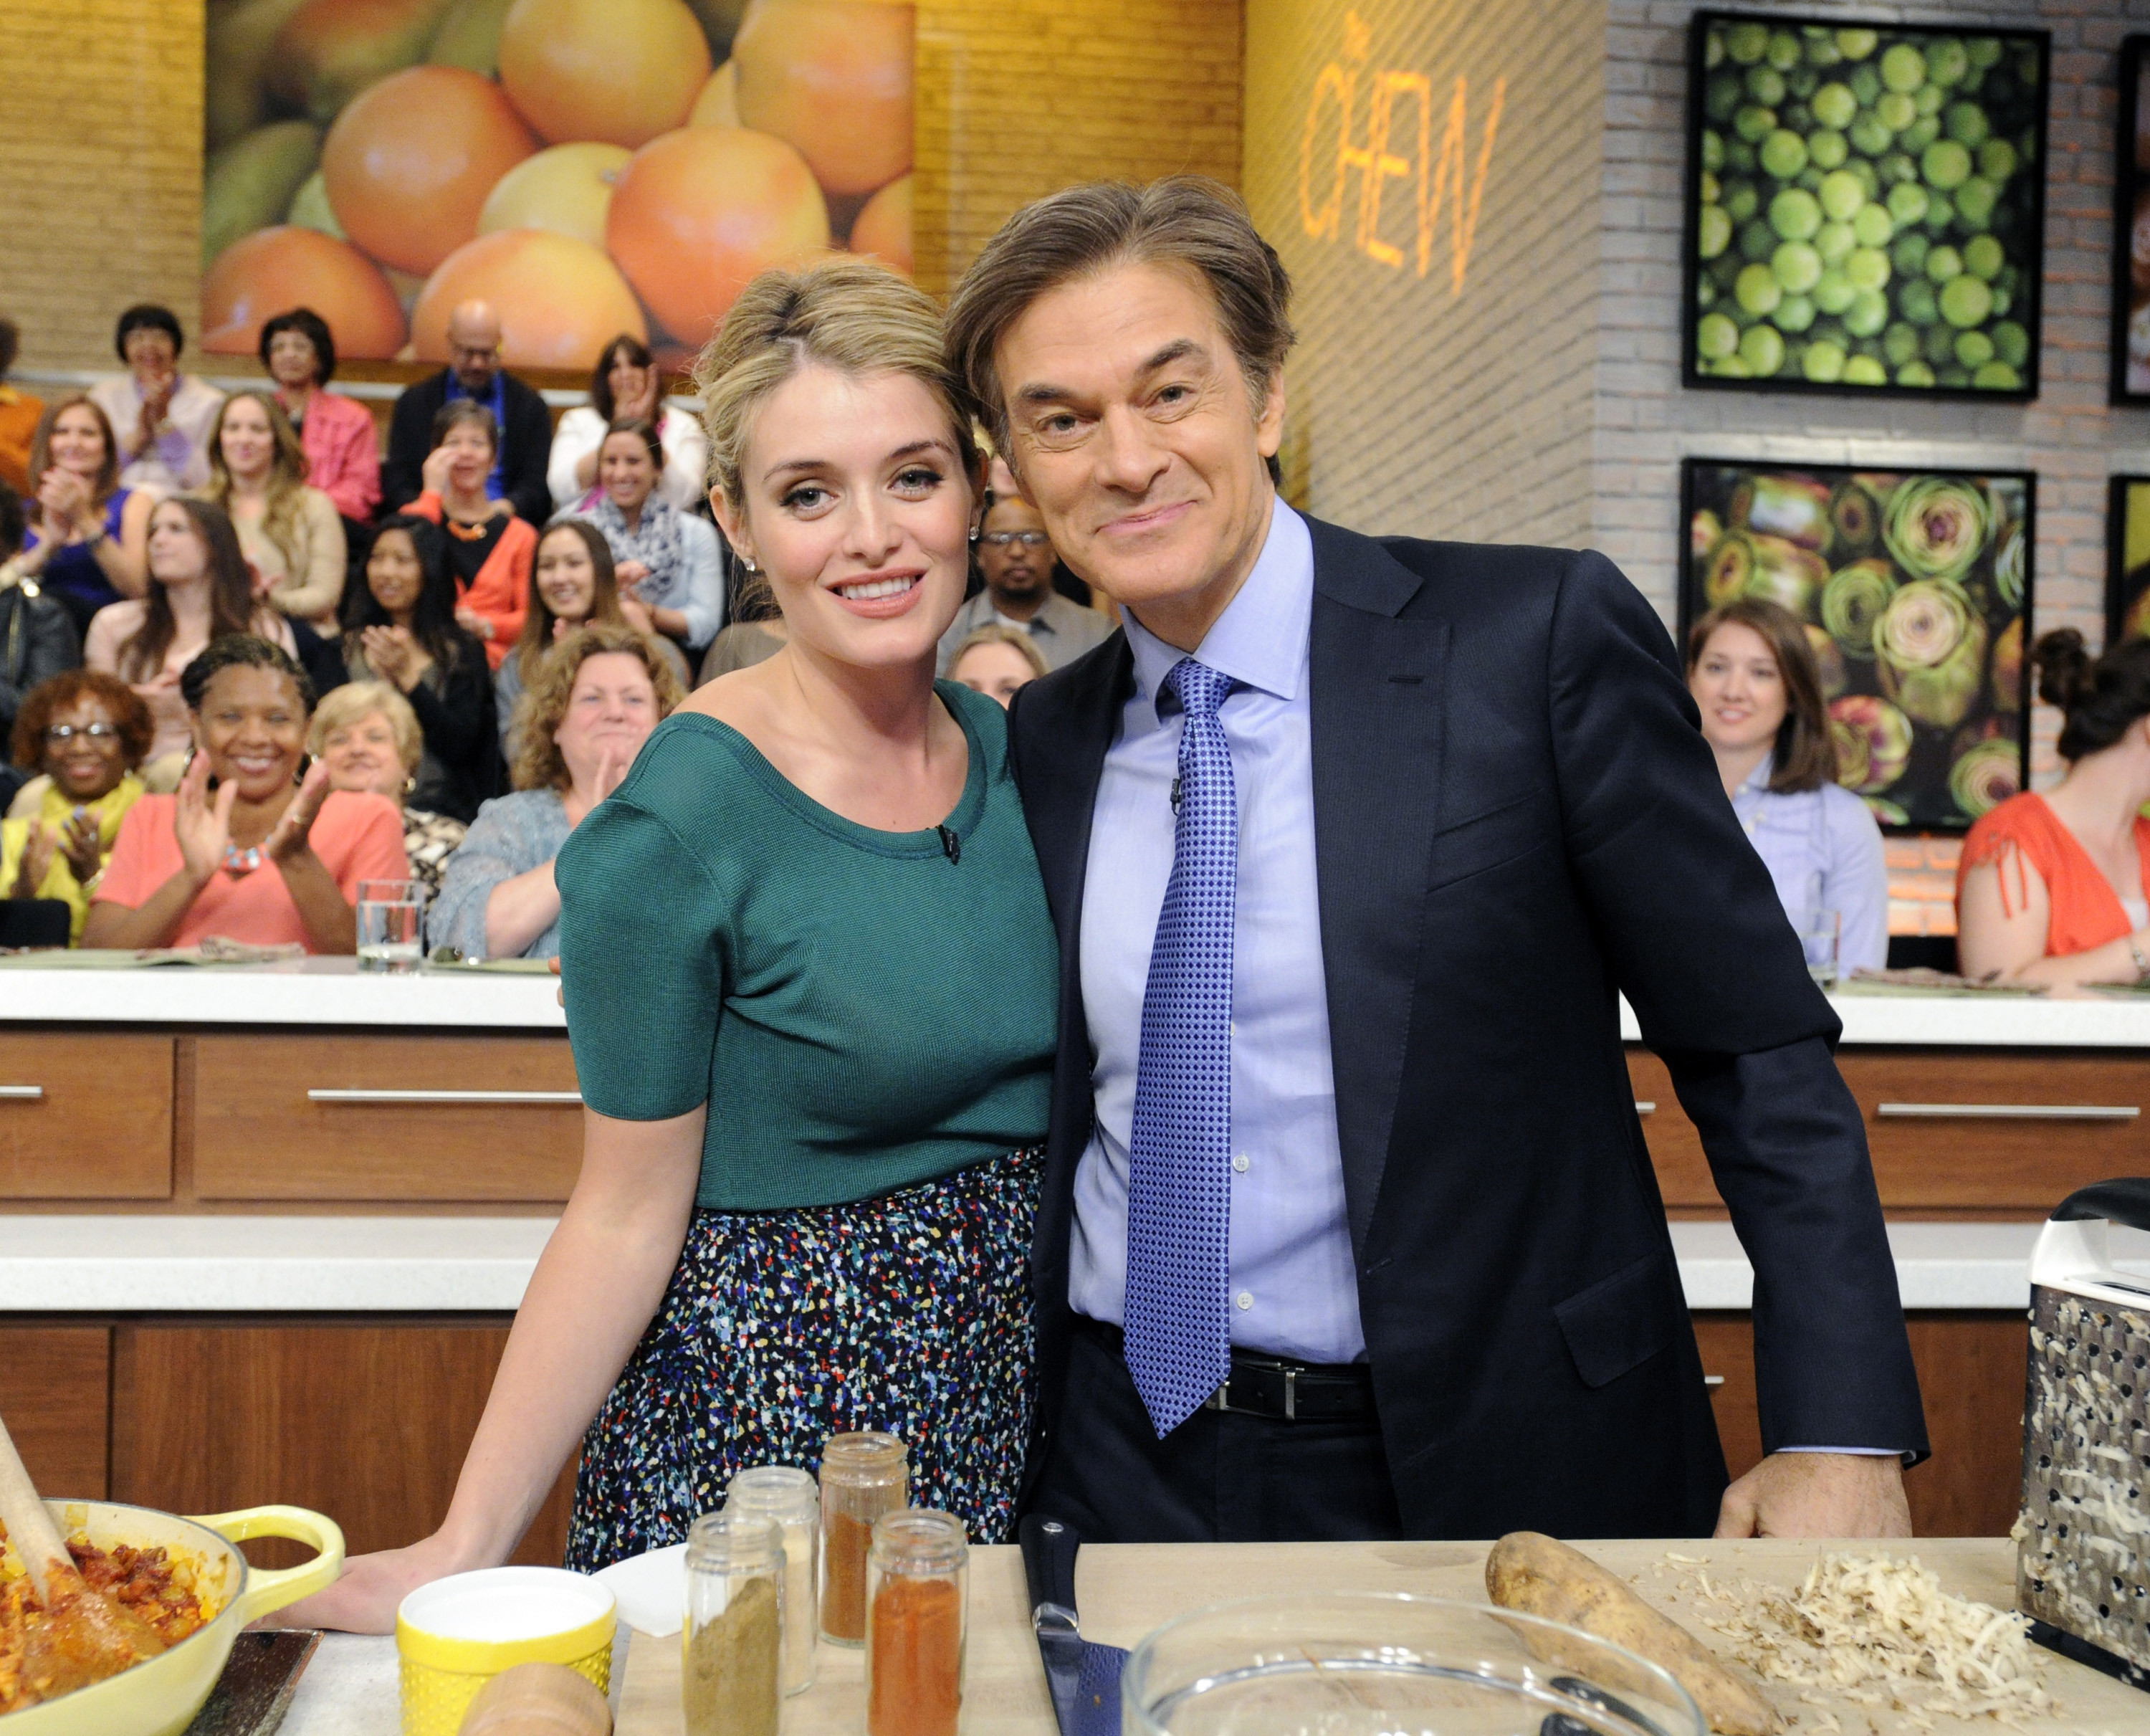 Daphne is one of Dr Oz's daughters